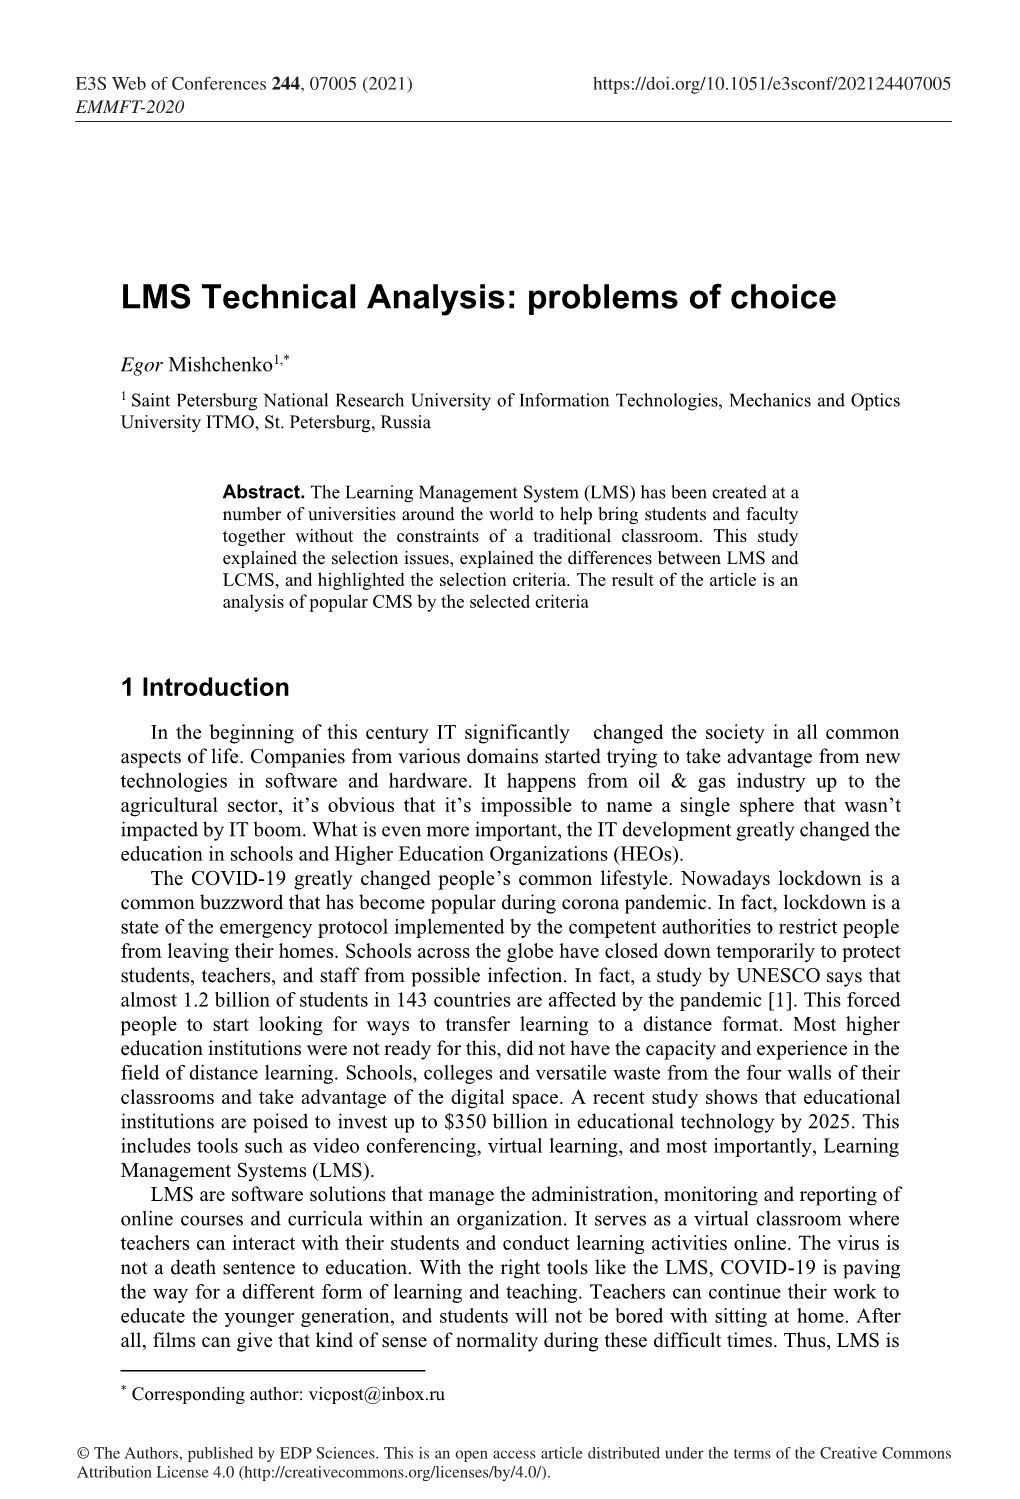 LMS Technical Analysis: Problems of Choice